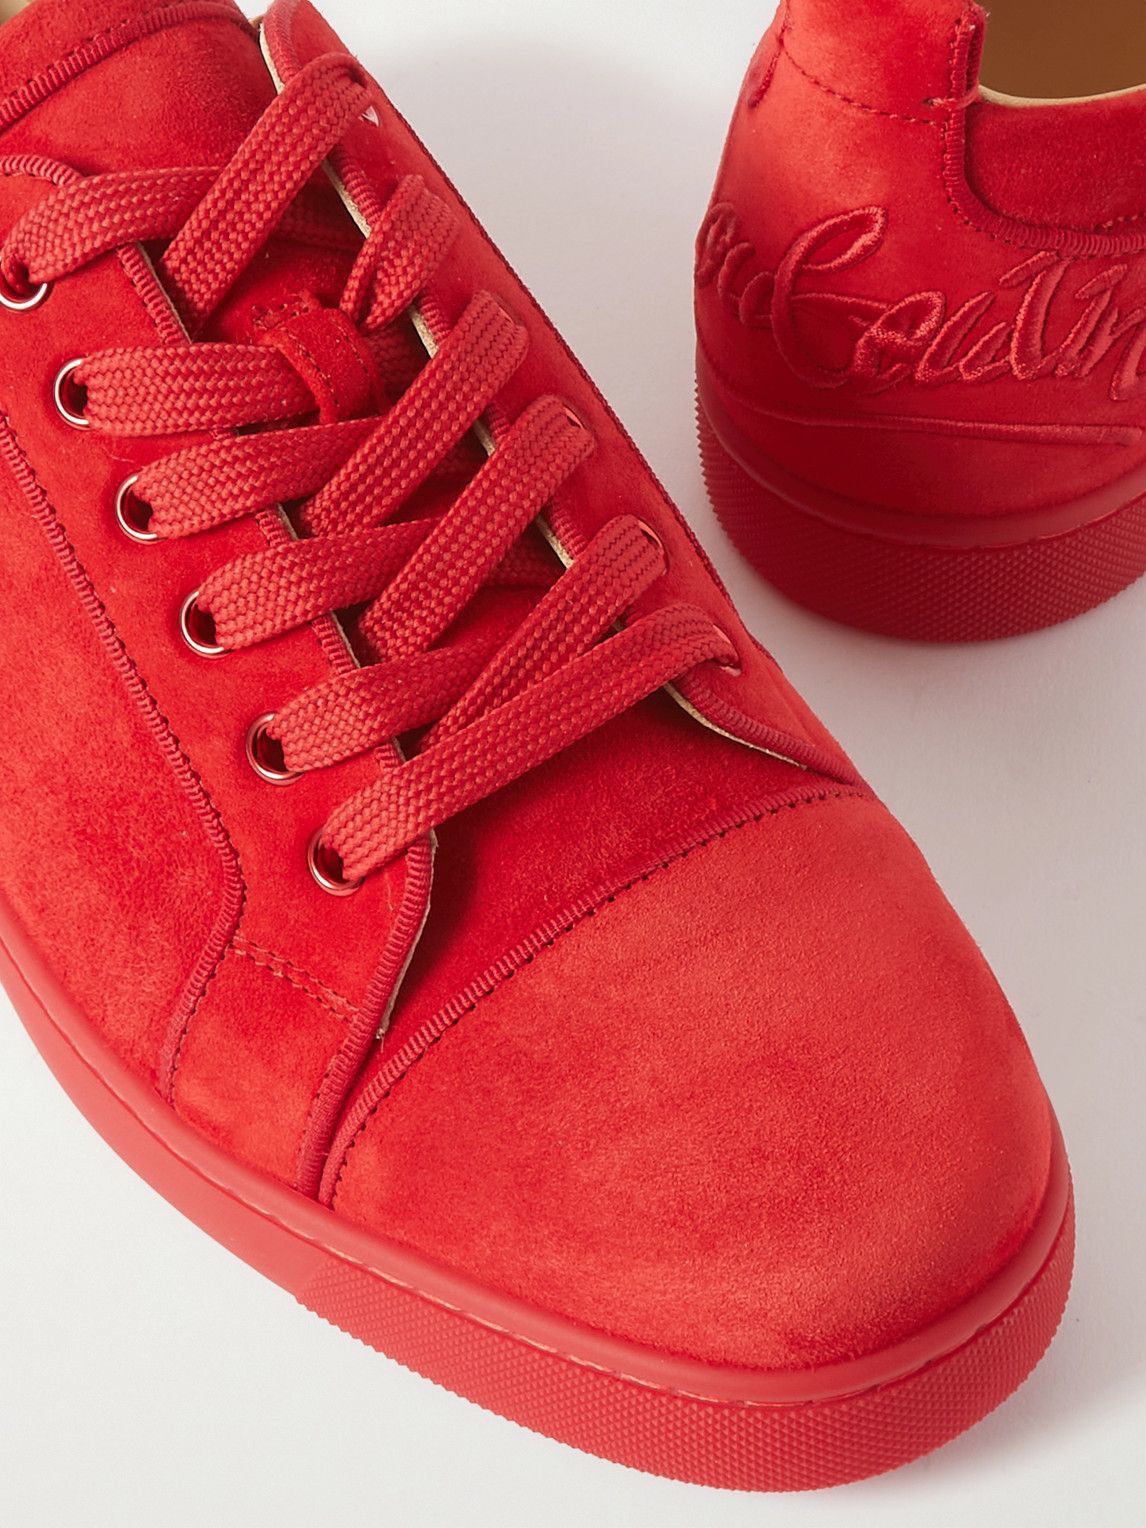 Christian Louboutin Fun Louis Junior Spikes Sneakers in Red for Men